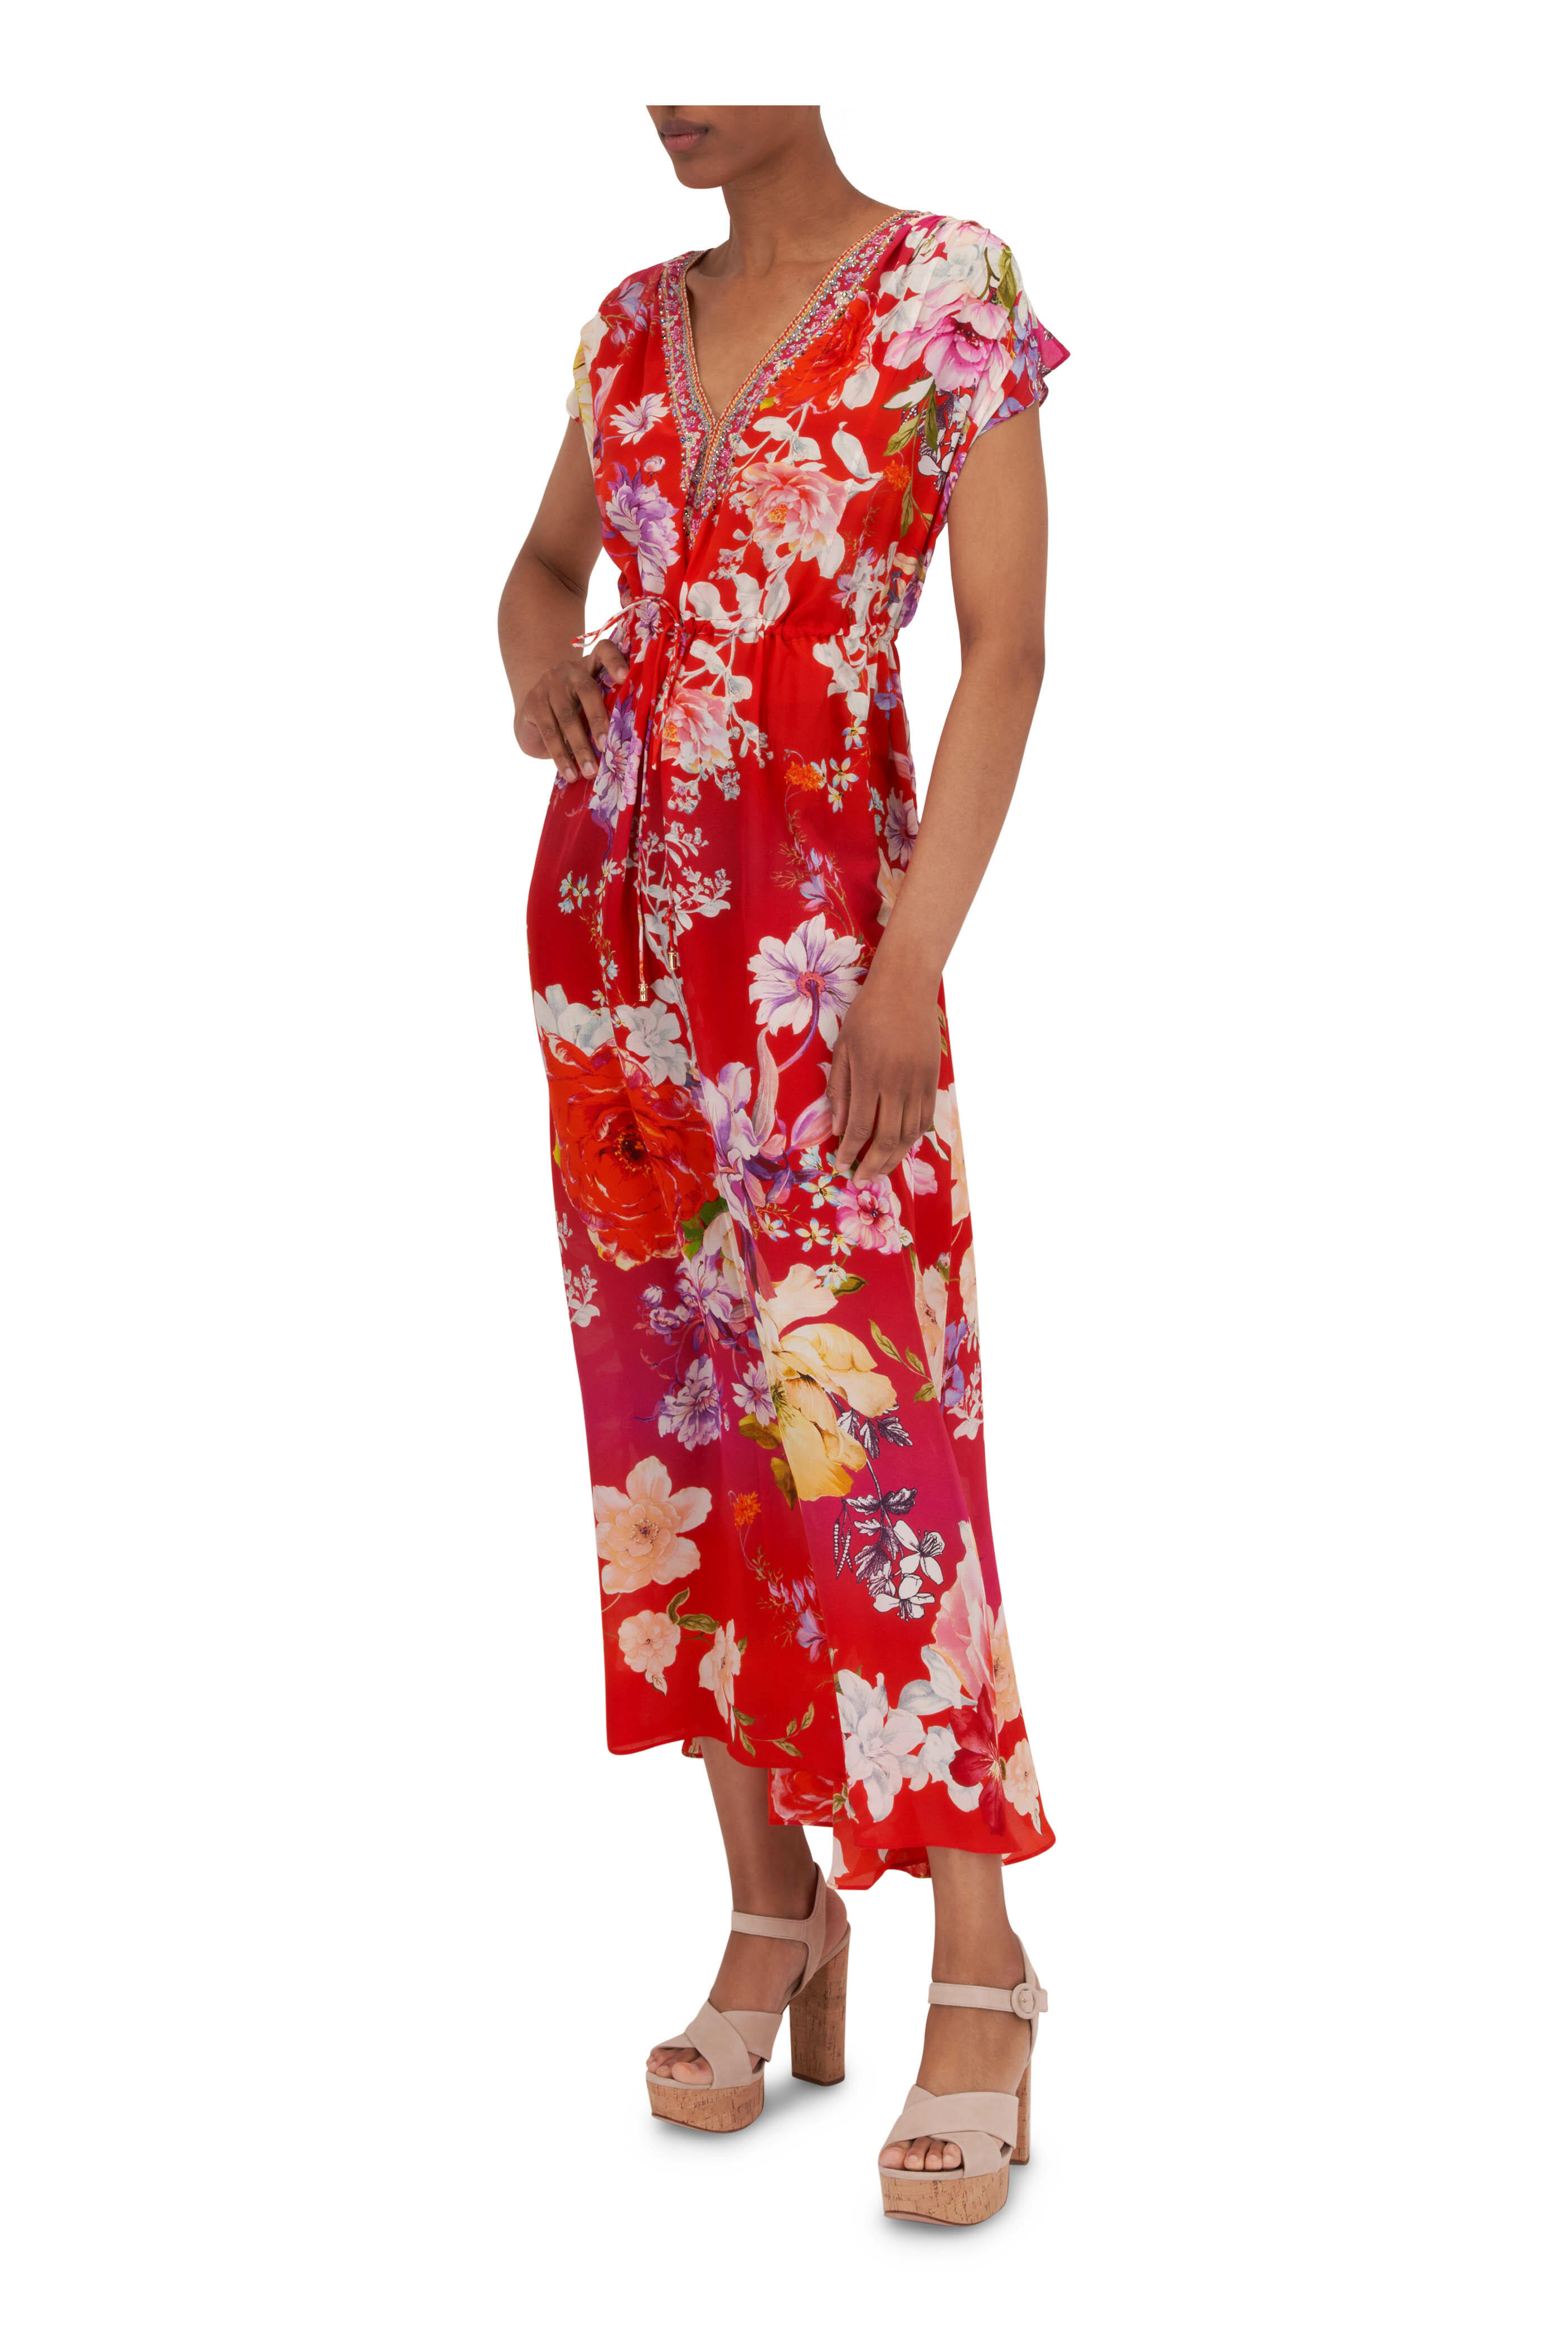 Venice Romance Red Floral Mesh Double Lined Cami Maxi Dress